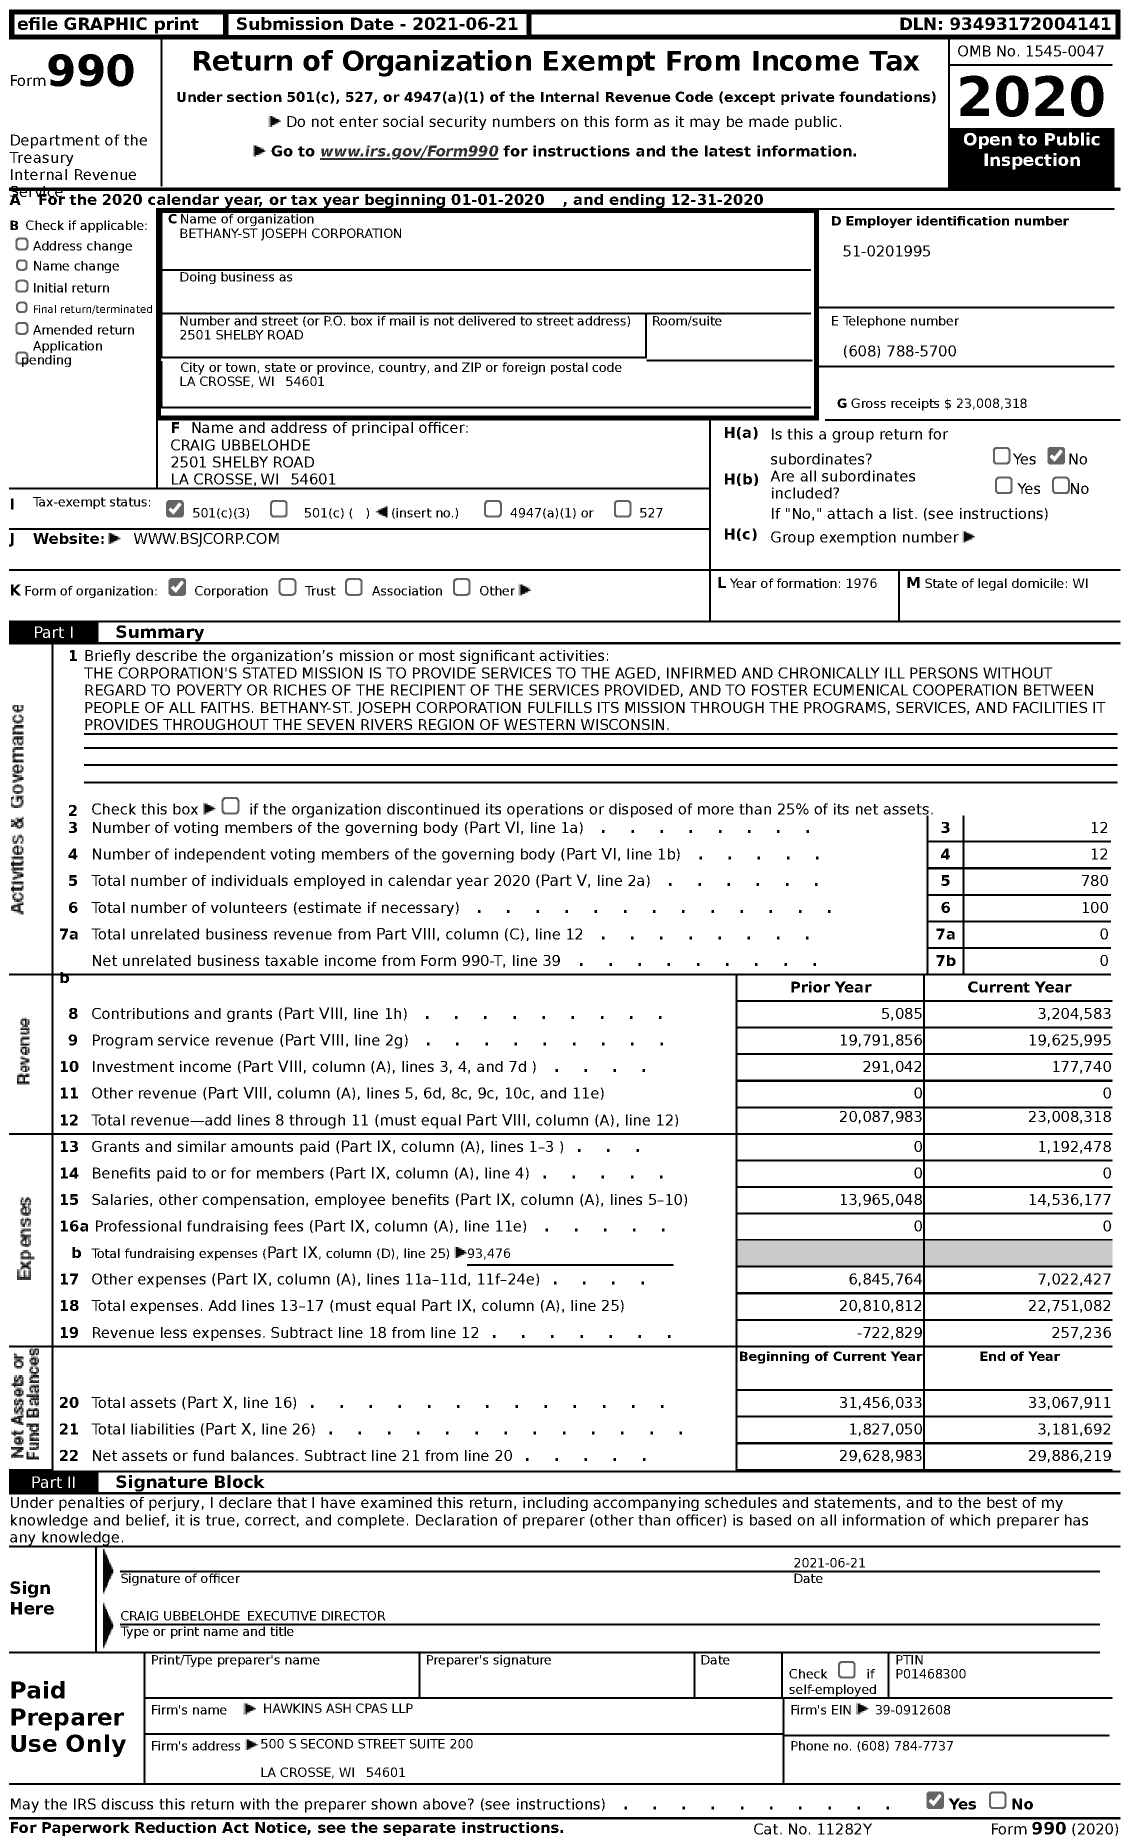 Image of first page of 2020 Form 990 for Bethany St Joseph Corporation (BSJ)